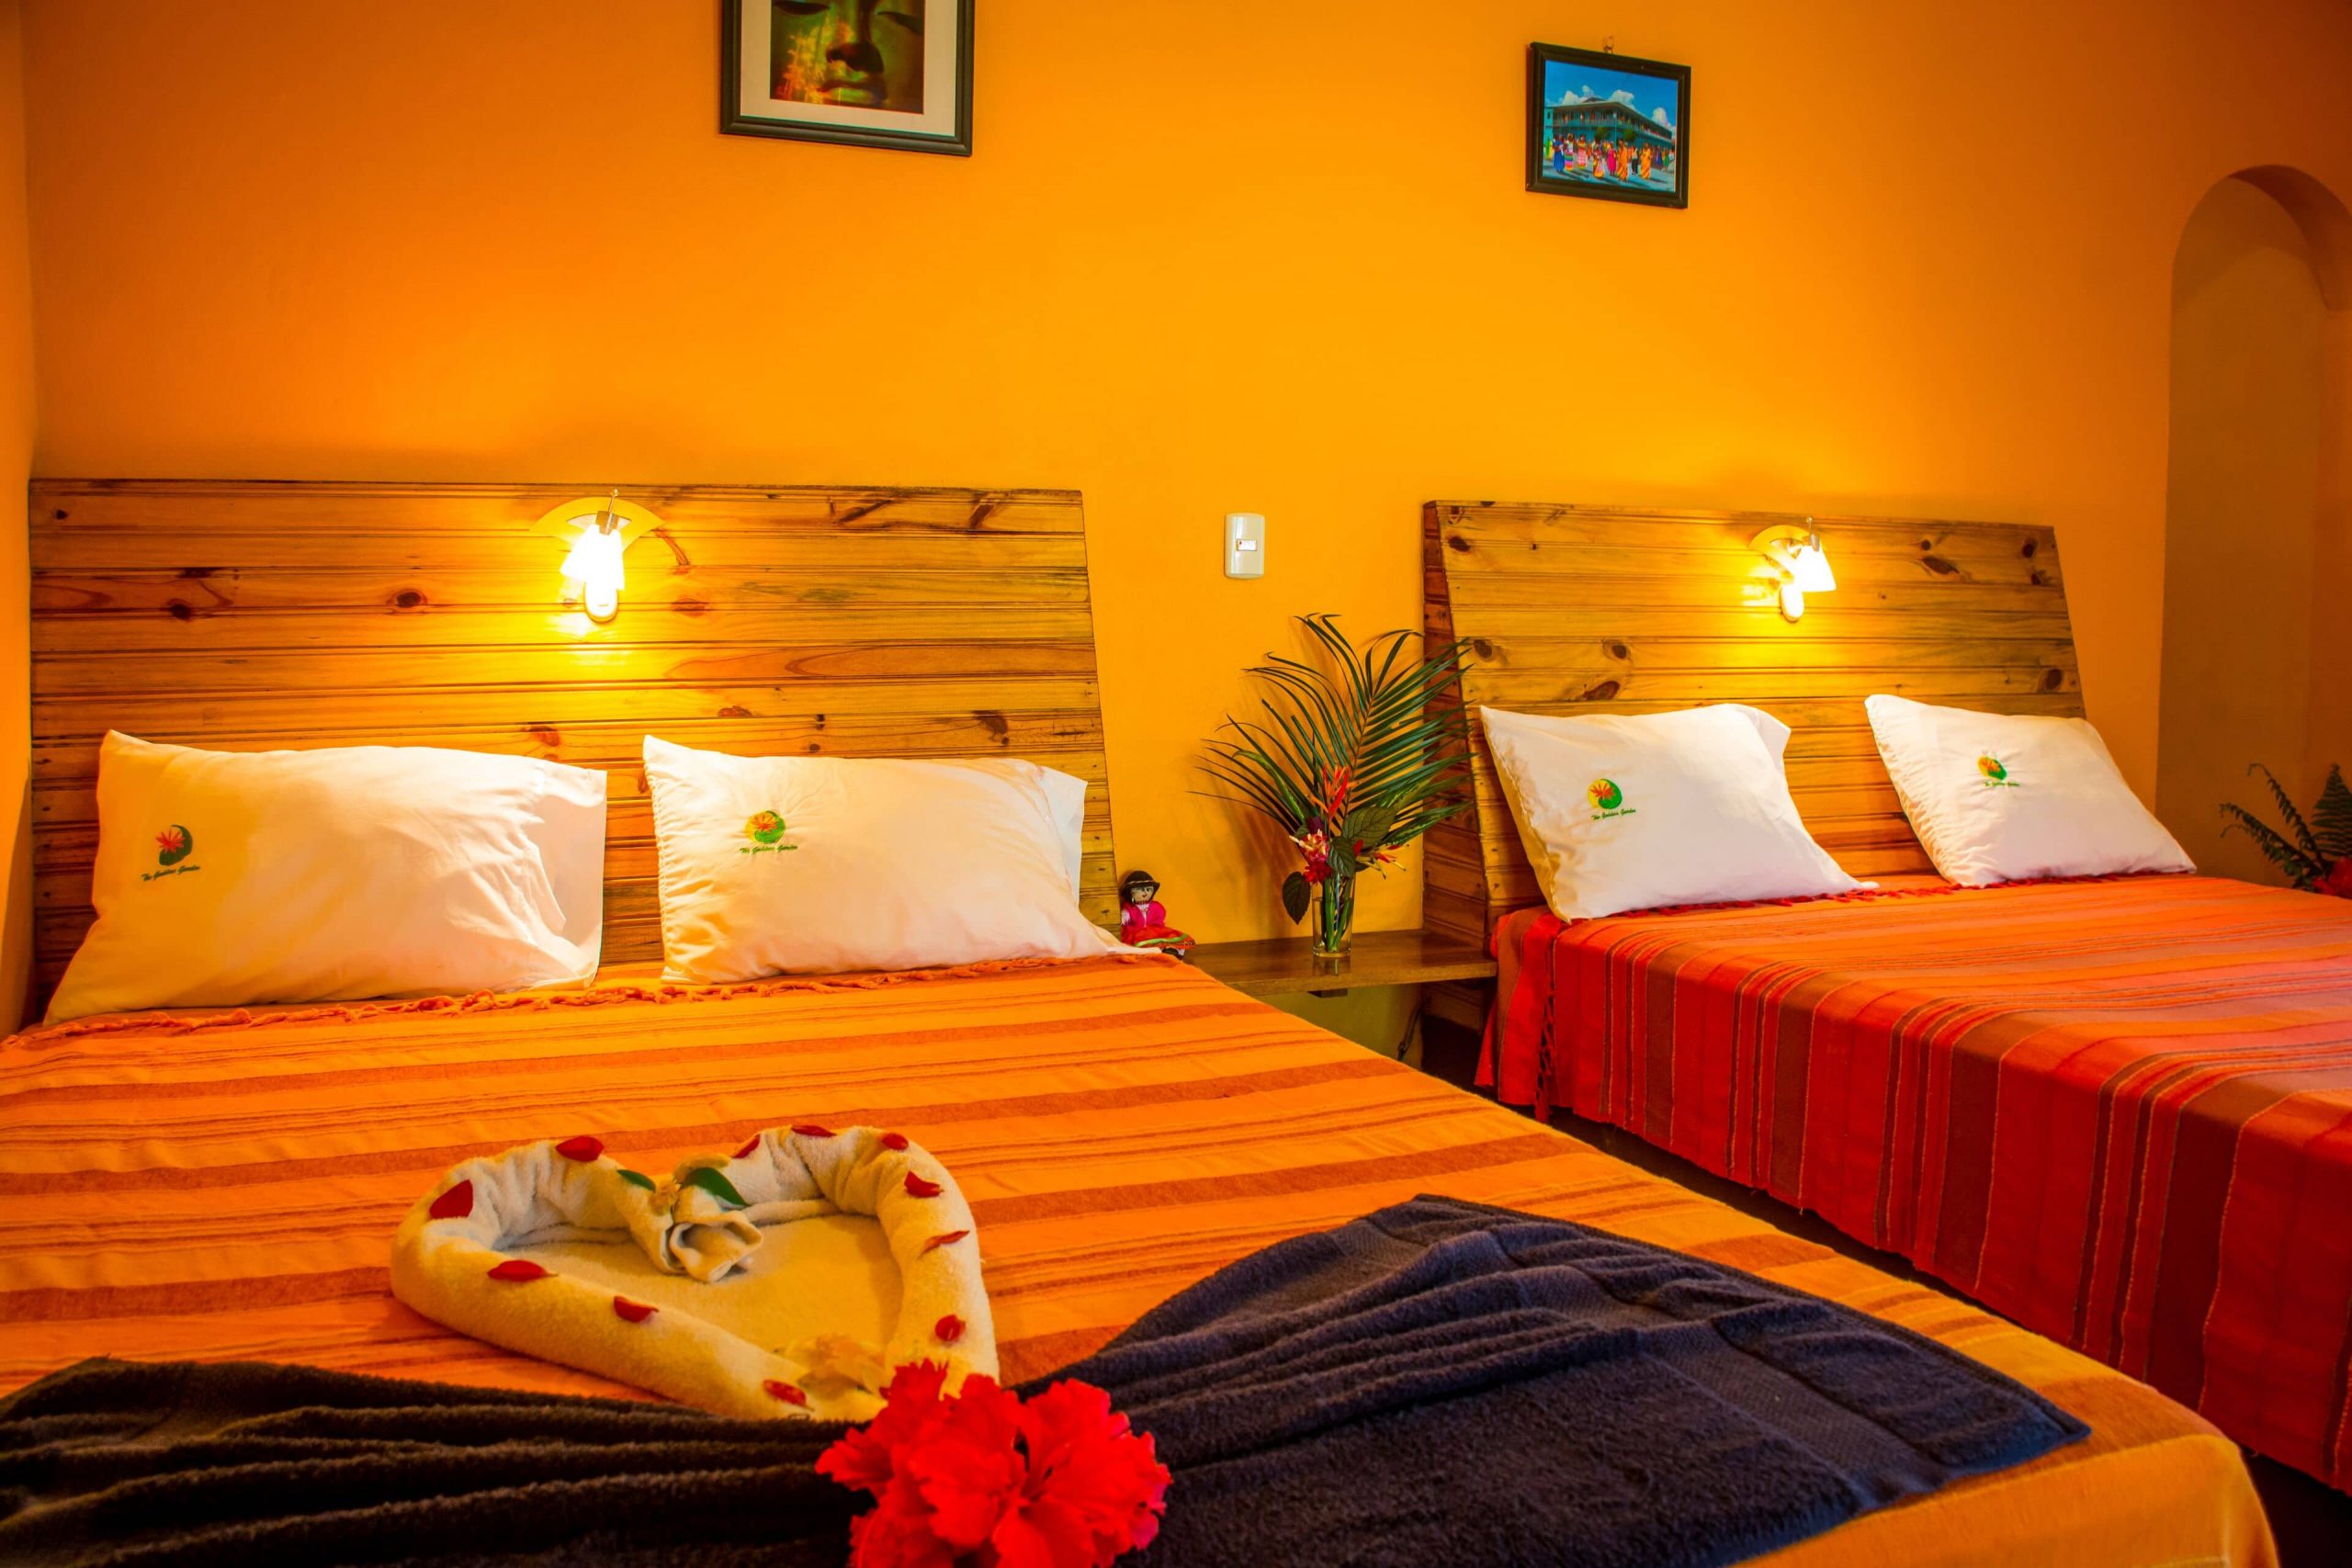 Bright bedding accompanies wooden features in this bright and rustic room at The Goddess Garden in Costa Rica.